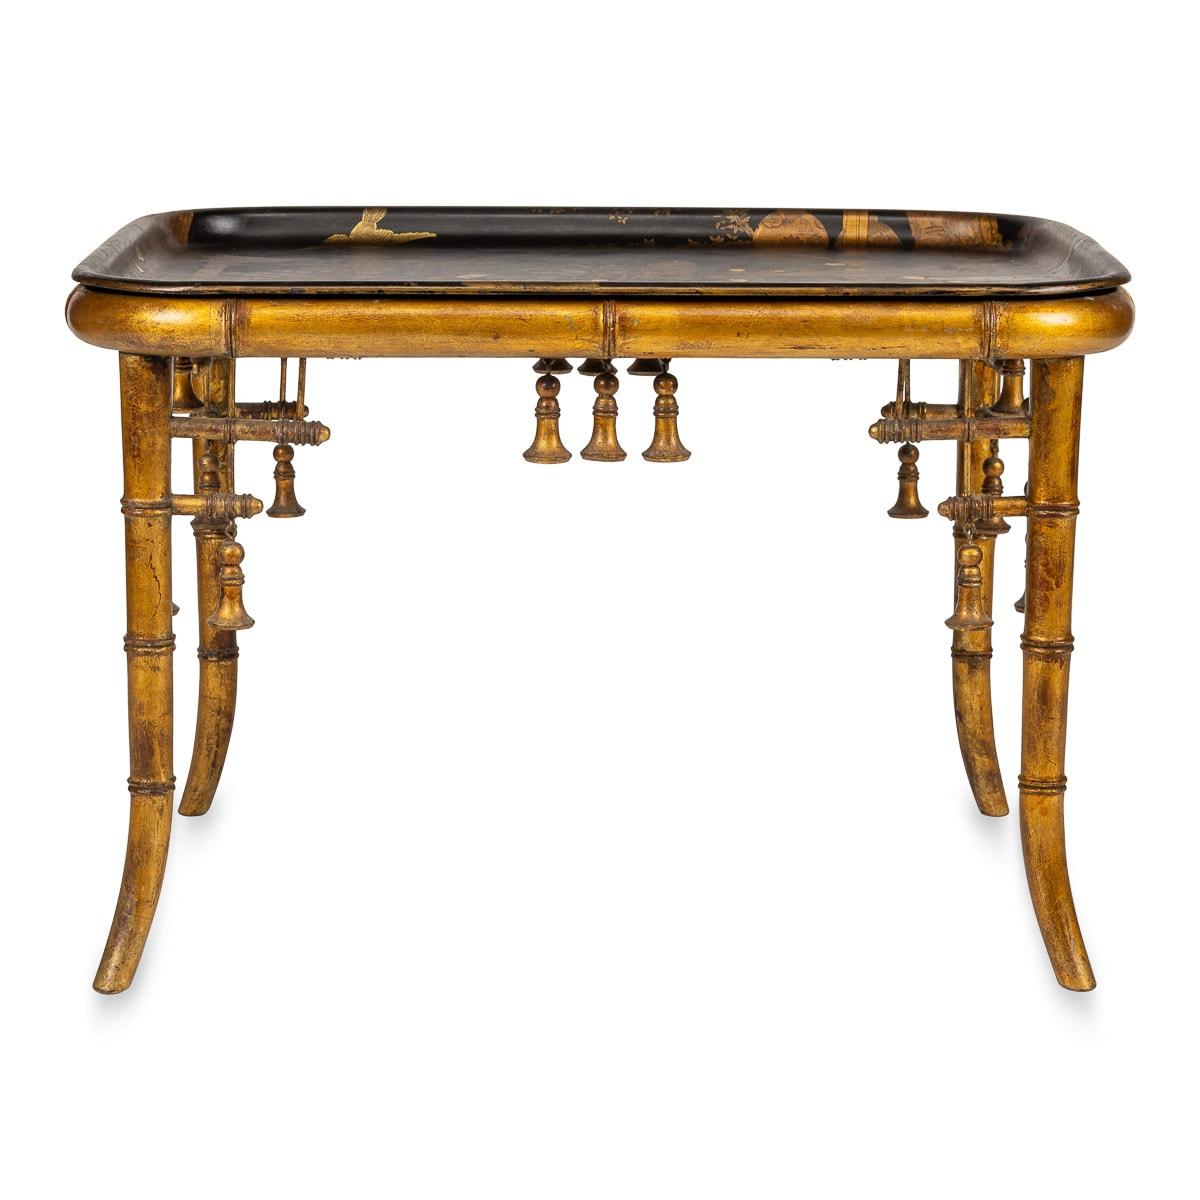 Antique late 19th Century French gilt wood tea table with Japanese style lacquer tray. This portraying a group of Japanese geisha's and nobility, flowering trees, lanterns and a white dove flying overhead. The gilt wood stand imitating bamboo and